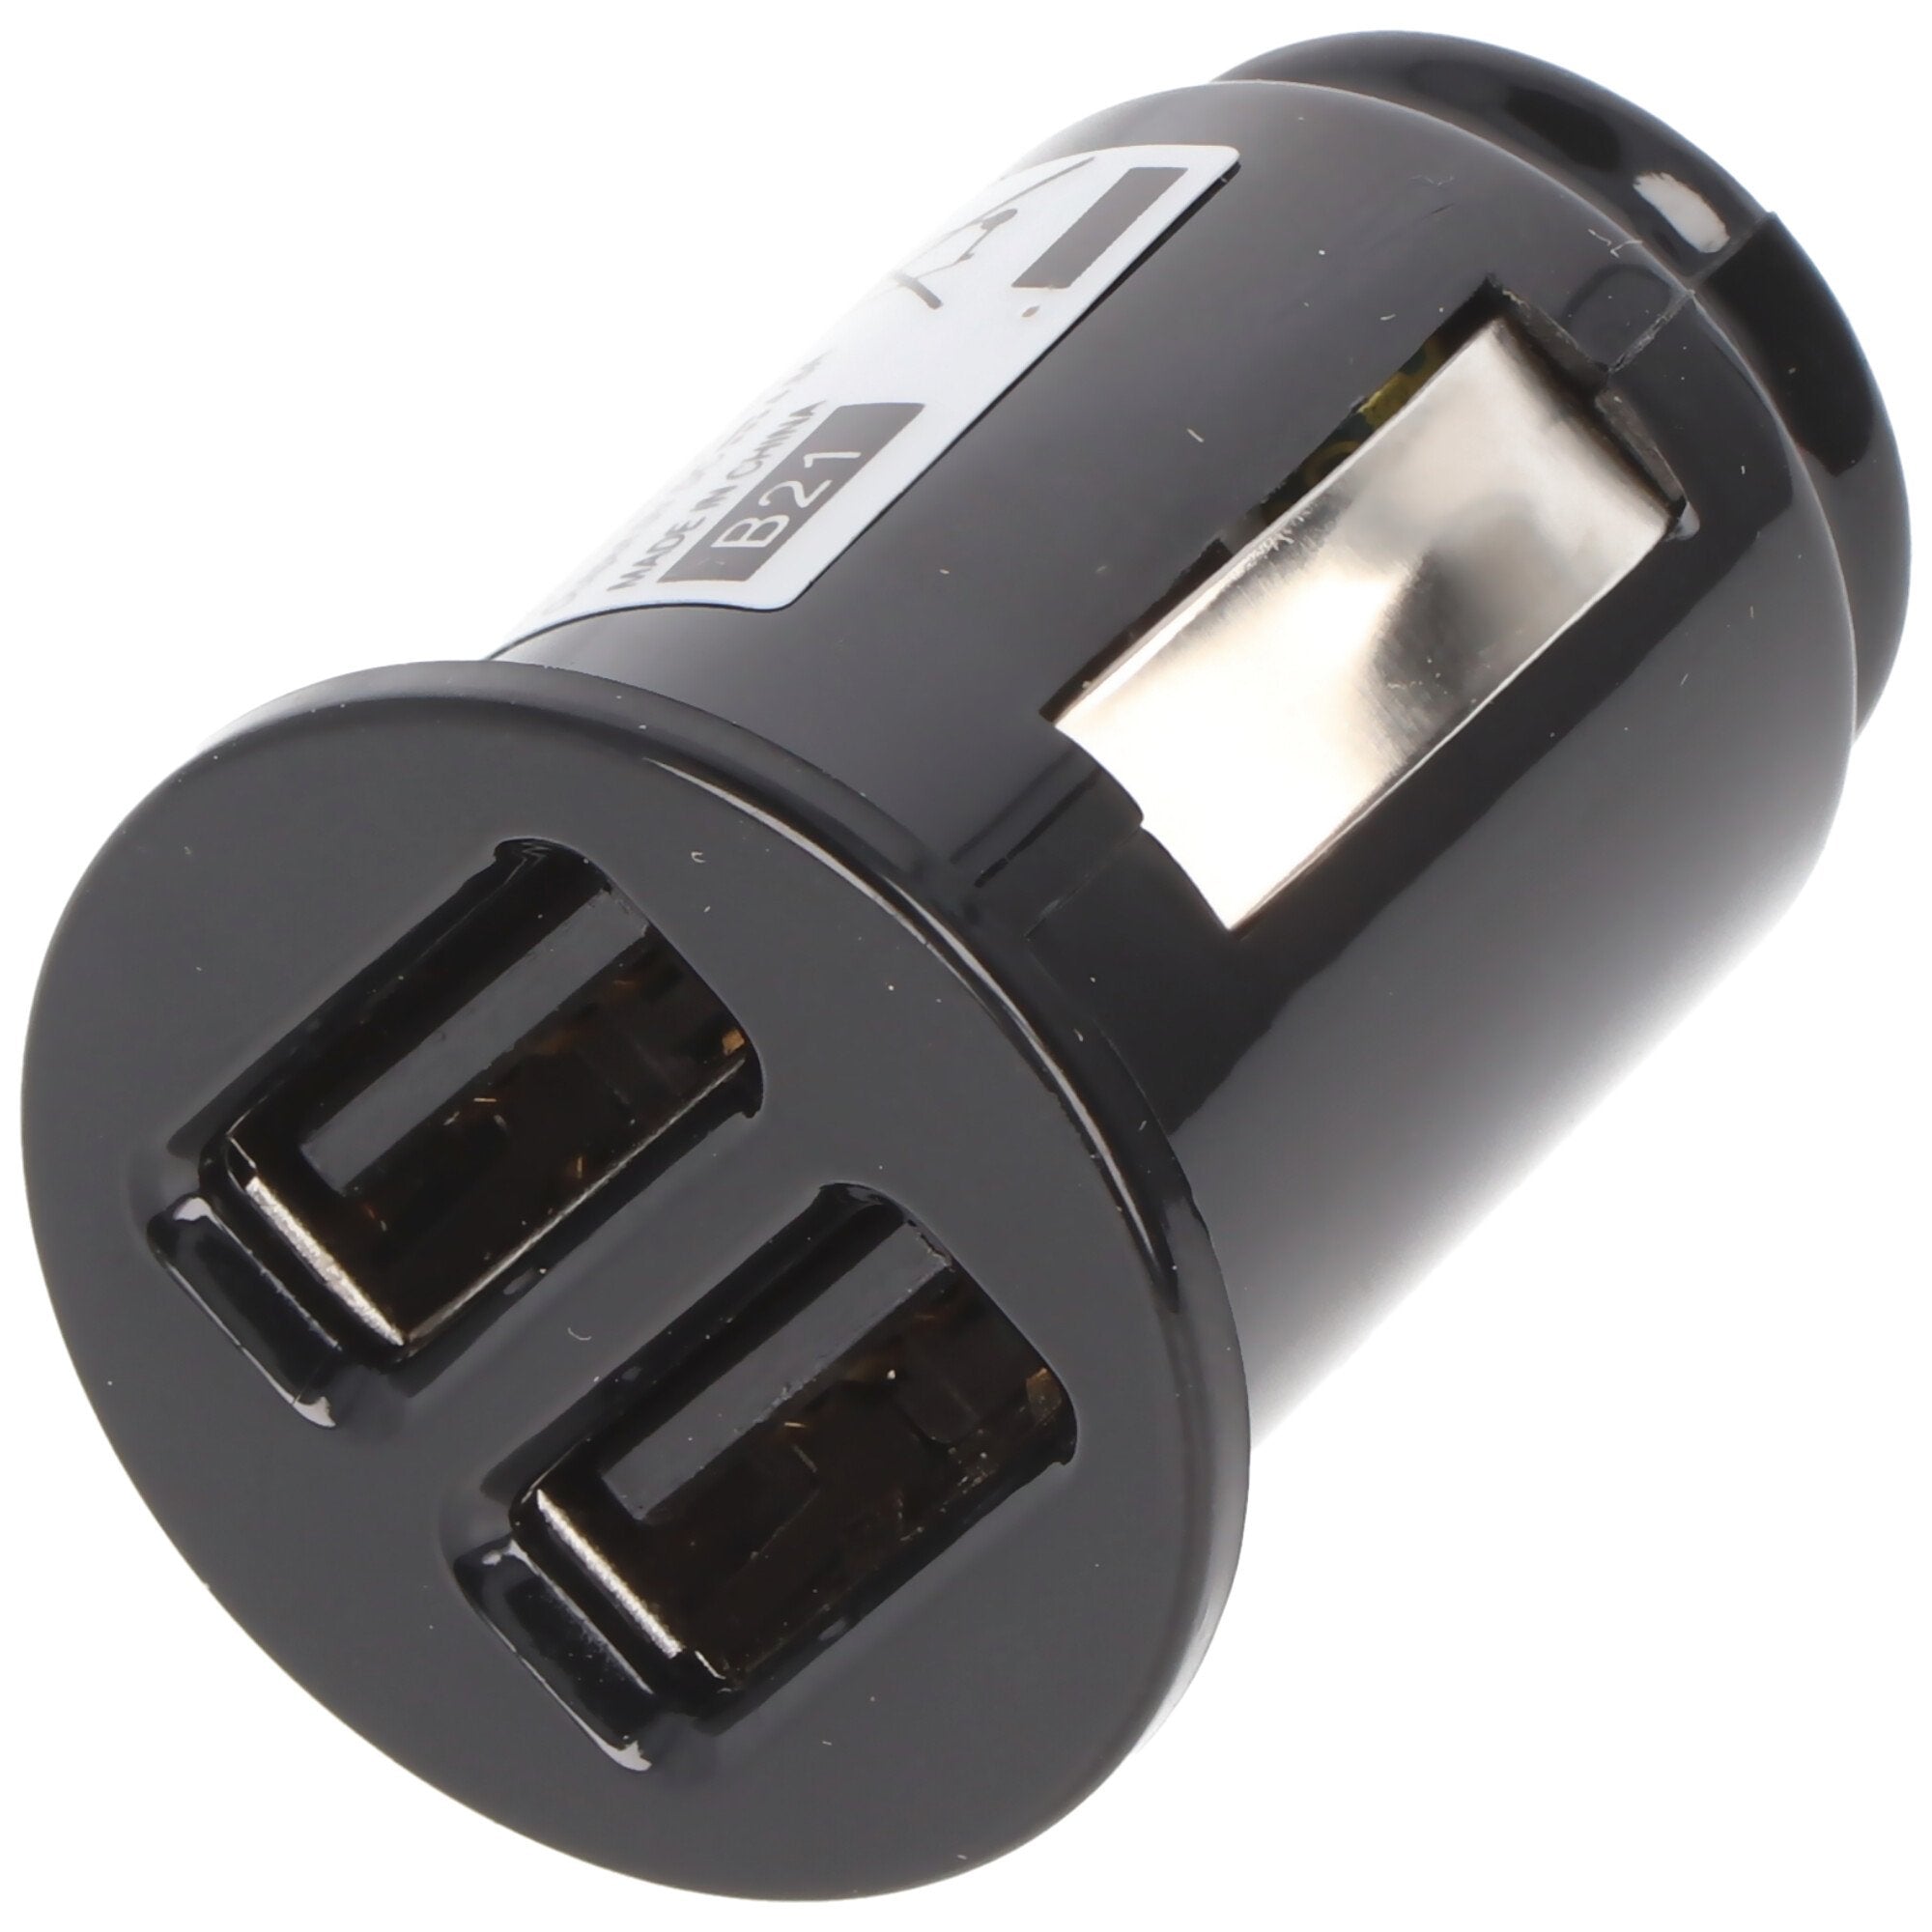 AccuCell car charger adapter USB - Dual USB - 4.8A with Auto-ID - black - TINY